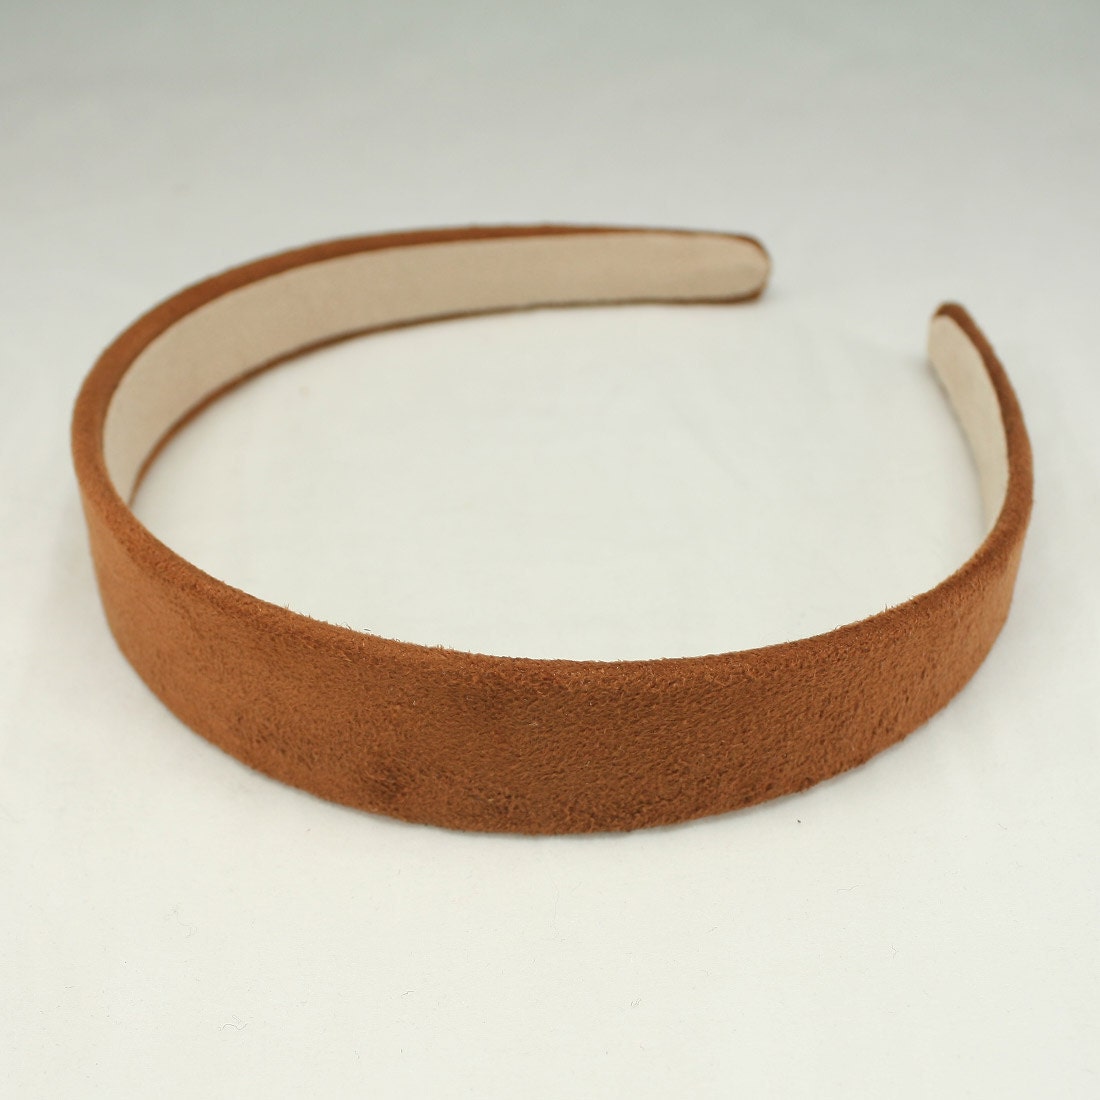 1 pc of 25mm 1 Plastic headband Brown color suede